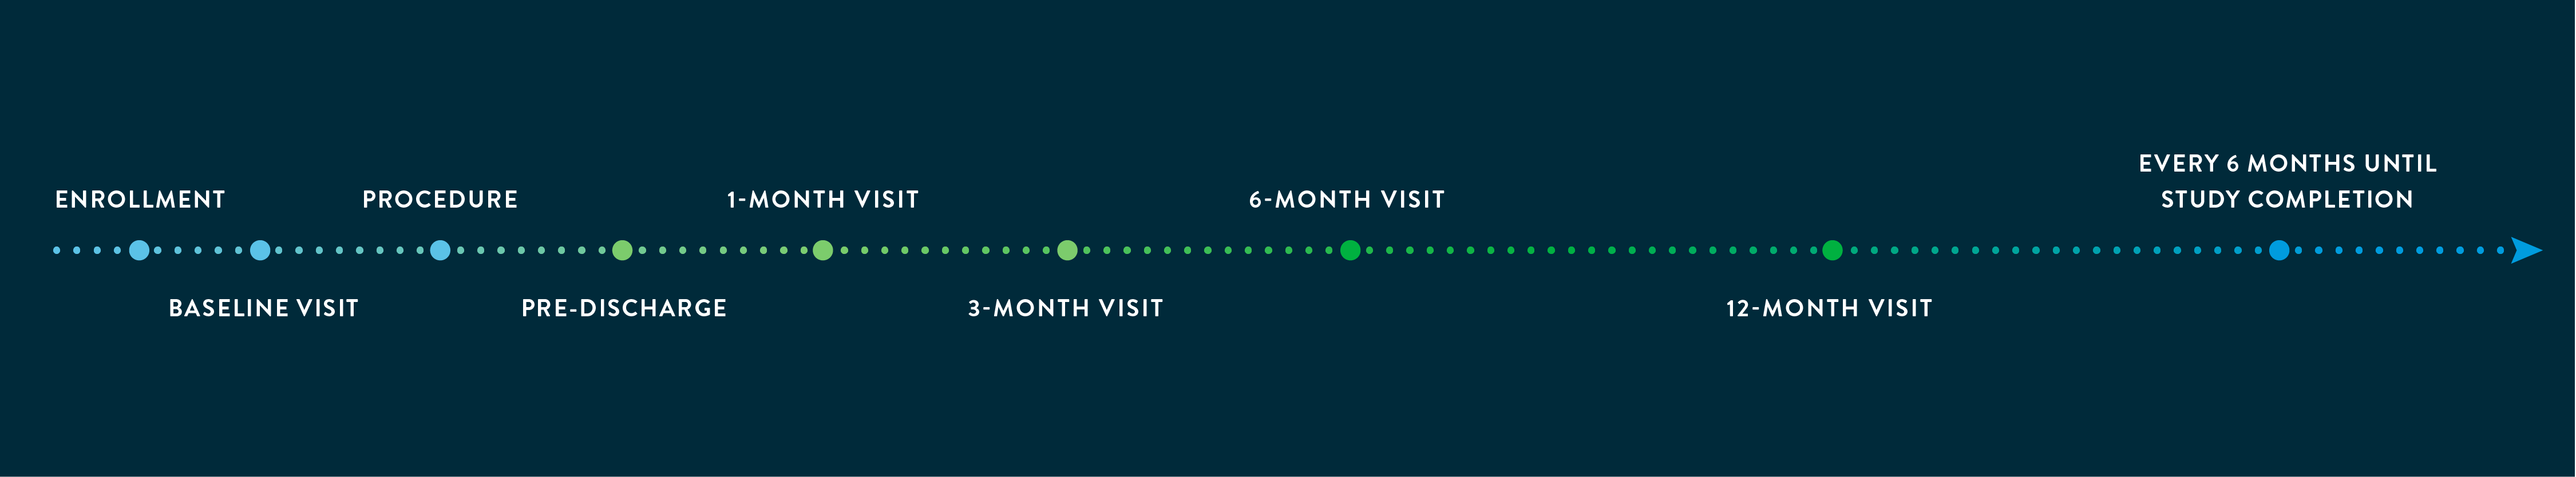  Timeline banner outlining the timing of visits